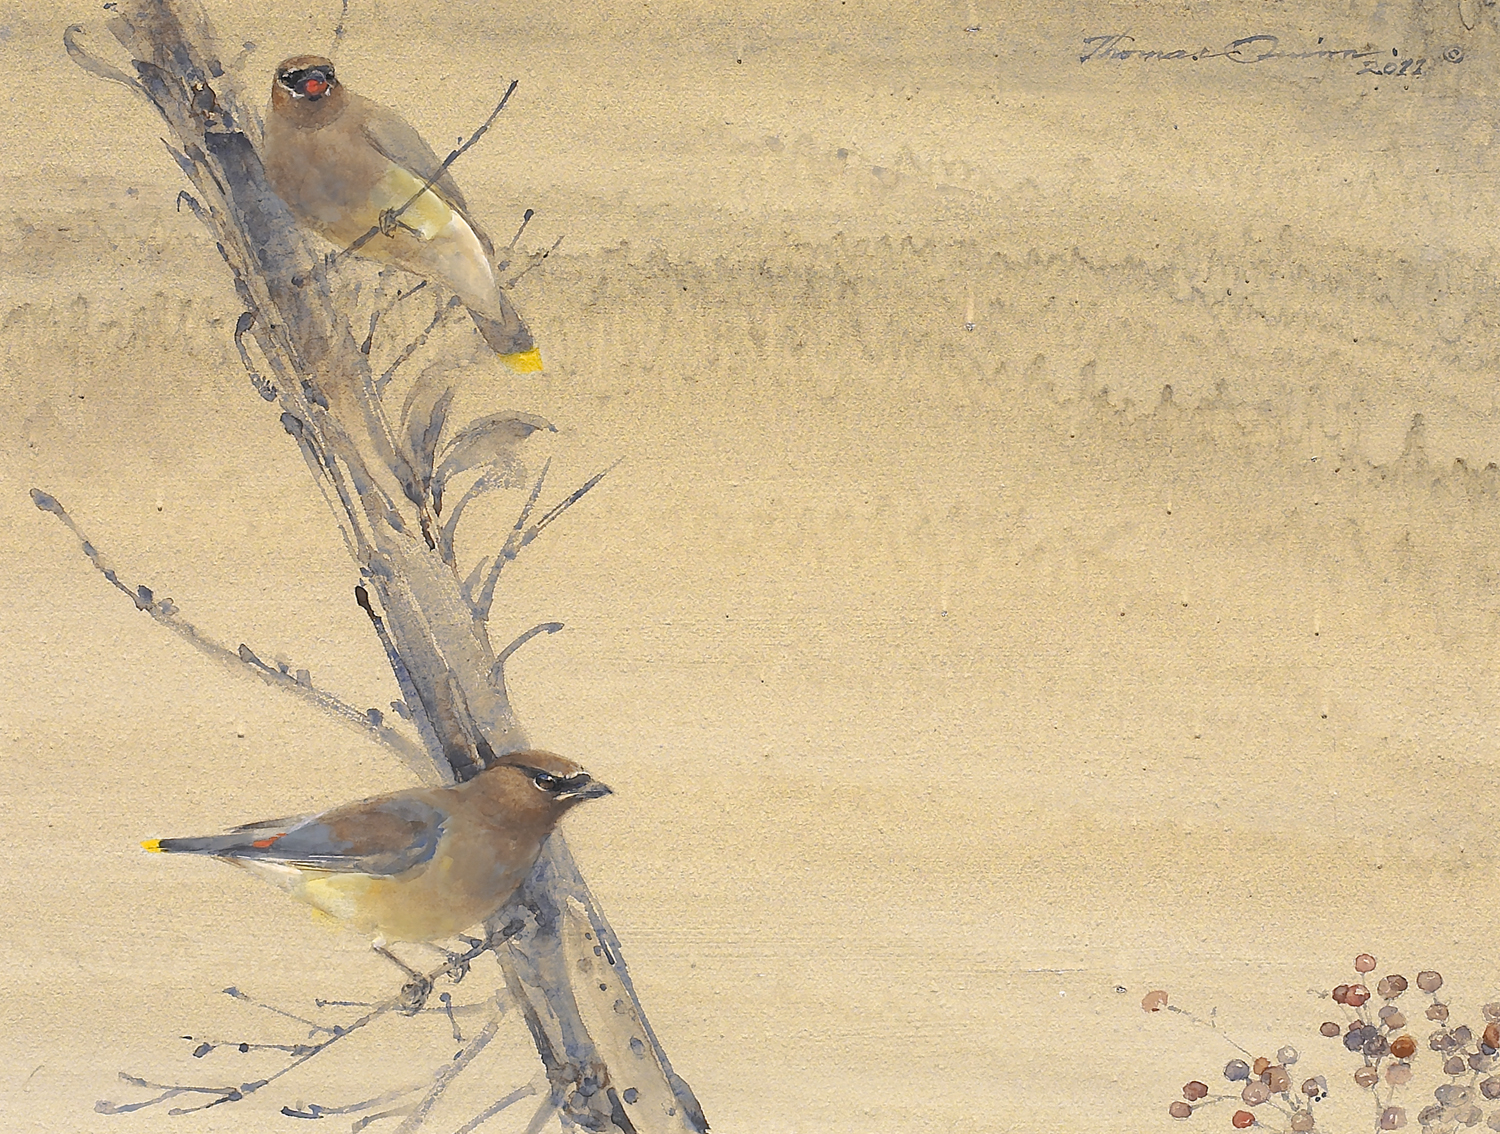 
		                					Thomas Quinn		                																	
																											<i>Cedar Waxwings and Madrone Berries,</i>  
																																																					gouache on paper, 
																																								14 5/8 x 18 7/8 inches 
																								
		                				